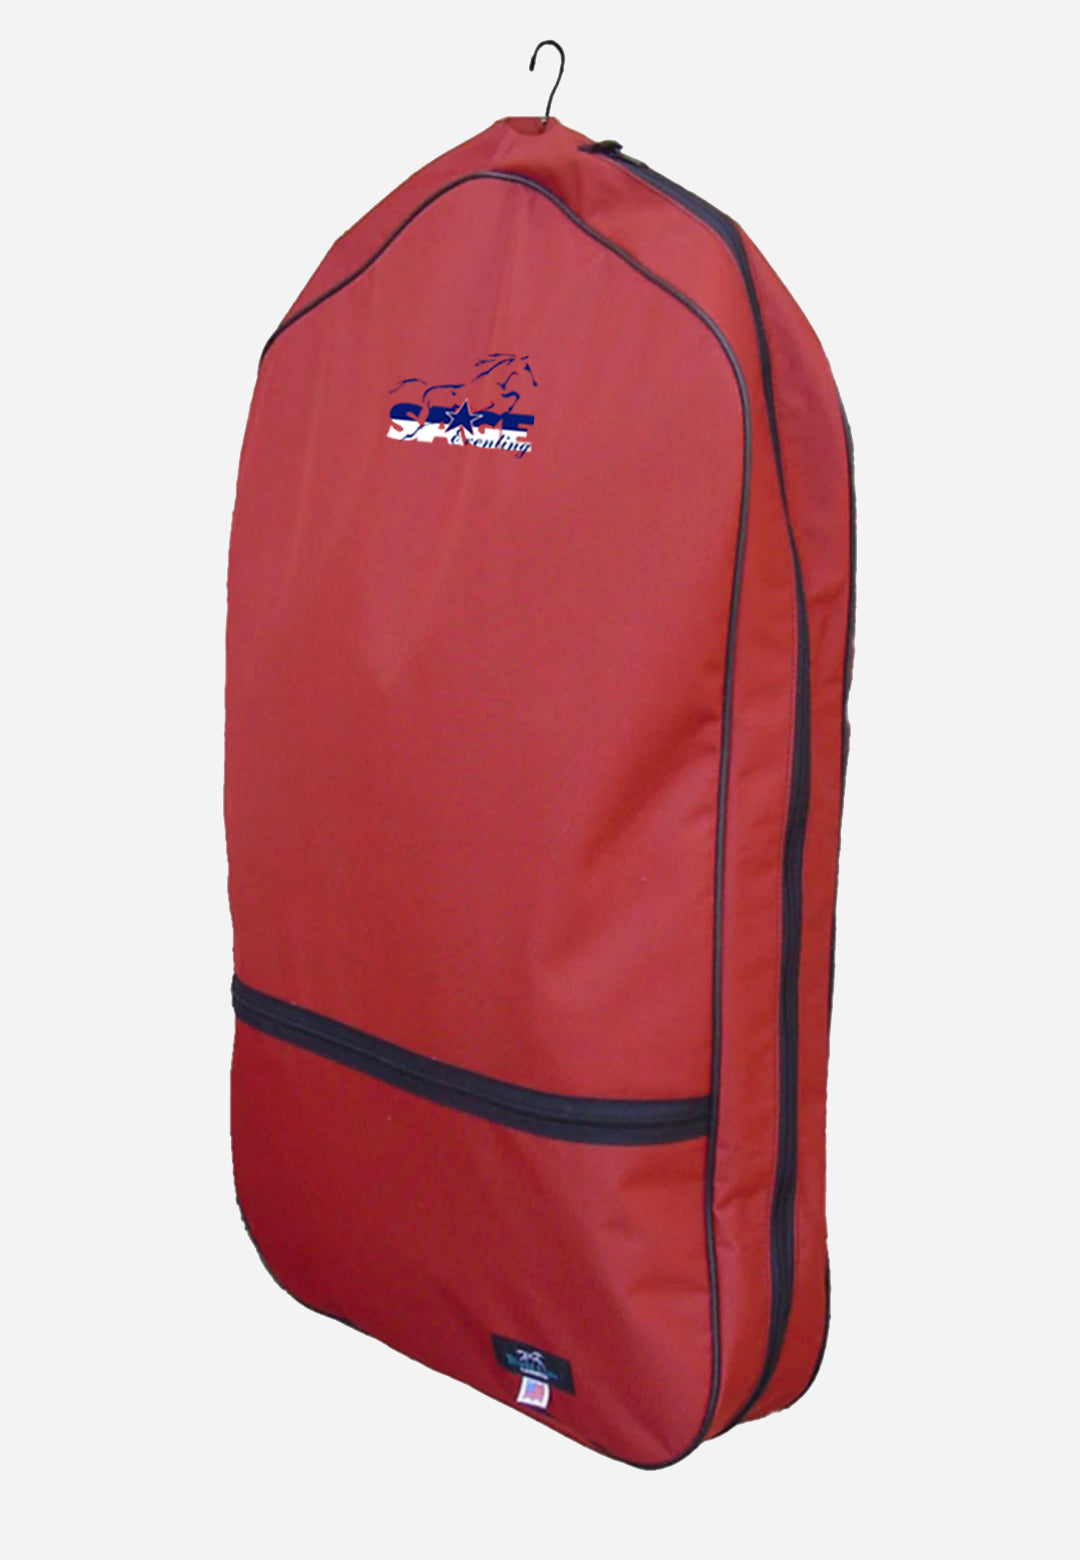 Sage Eventing World Class Equine Garment Bag - Original and XL, Red or Navy